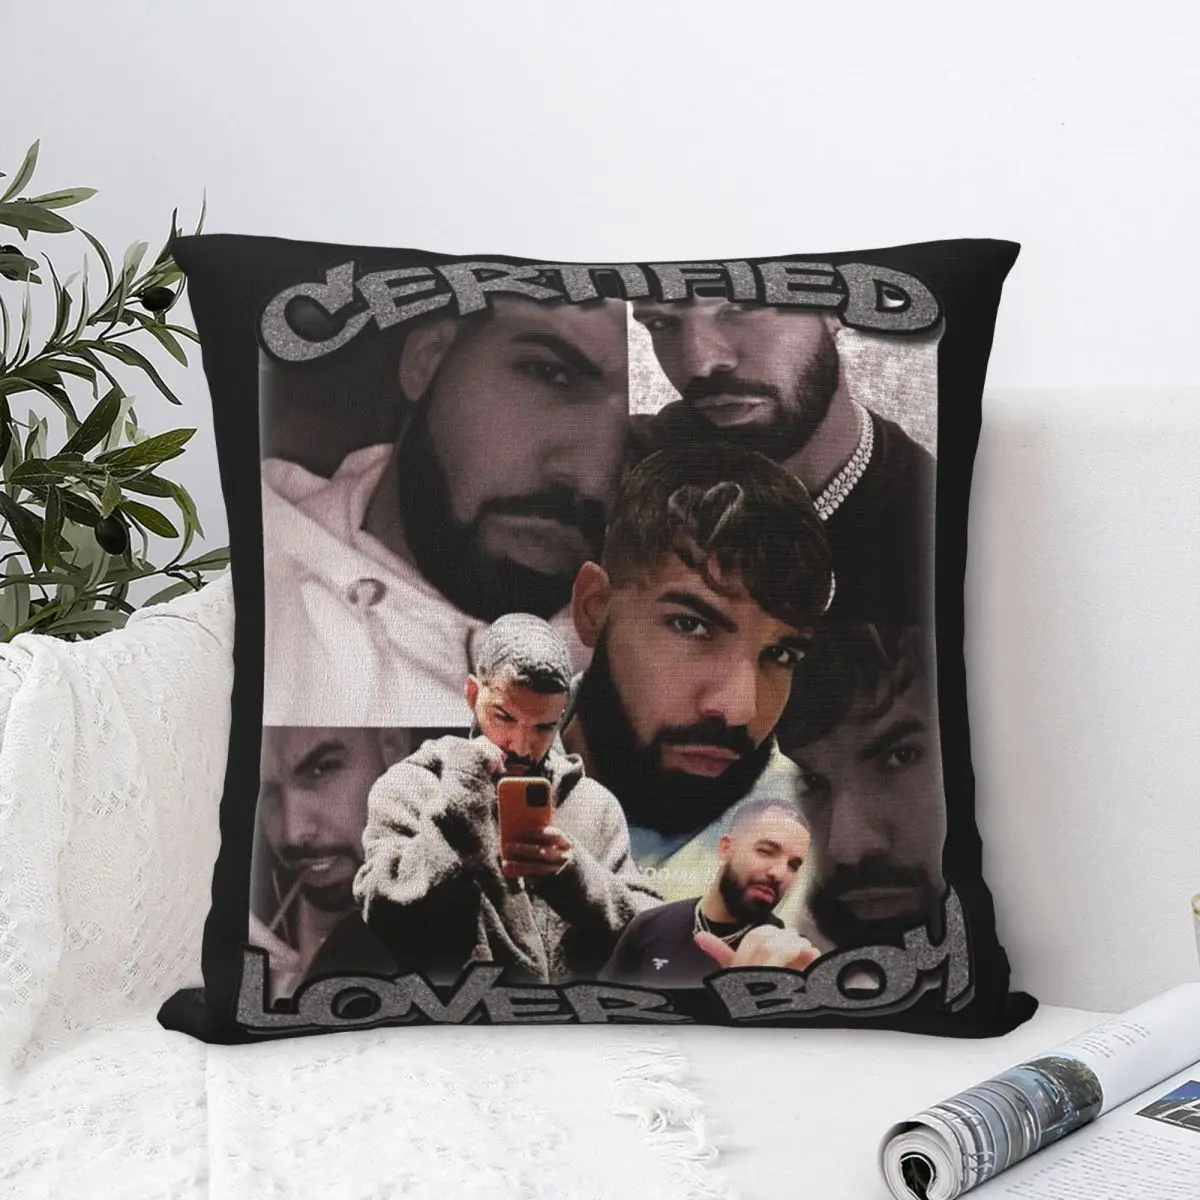 

BBL Drake Certified Lover Boy Pillowcase Polyester Cushion Cover Decoration Throw Pillow Case Cover Home Zipper 45X45cm